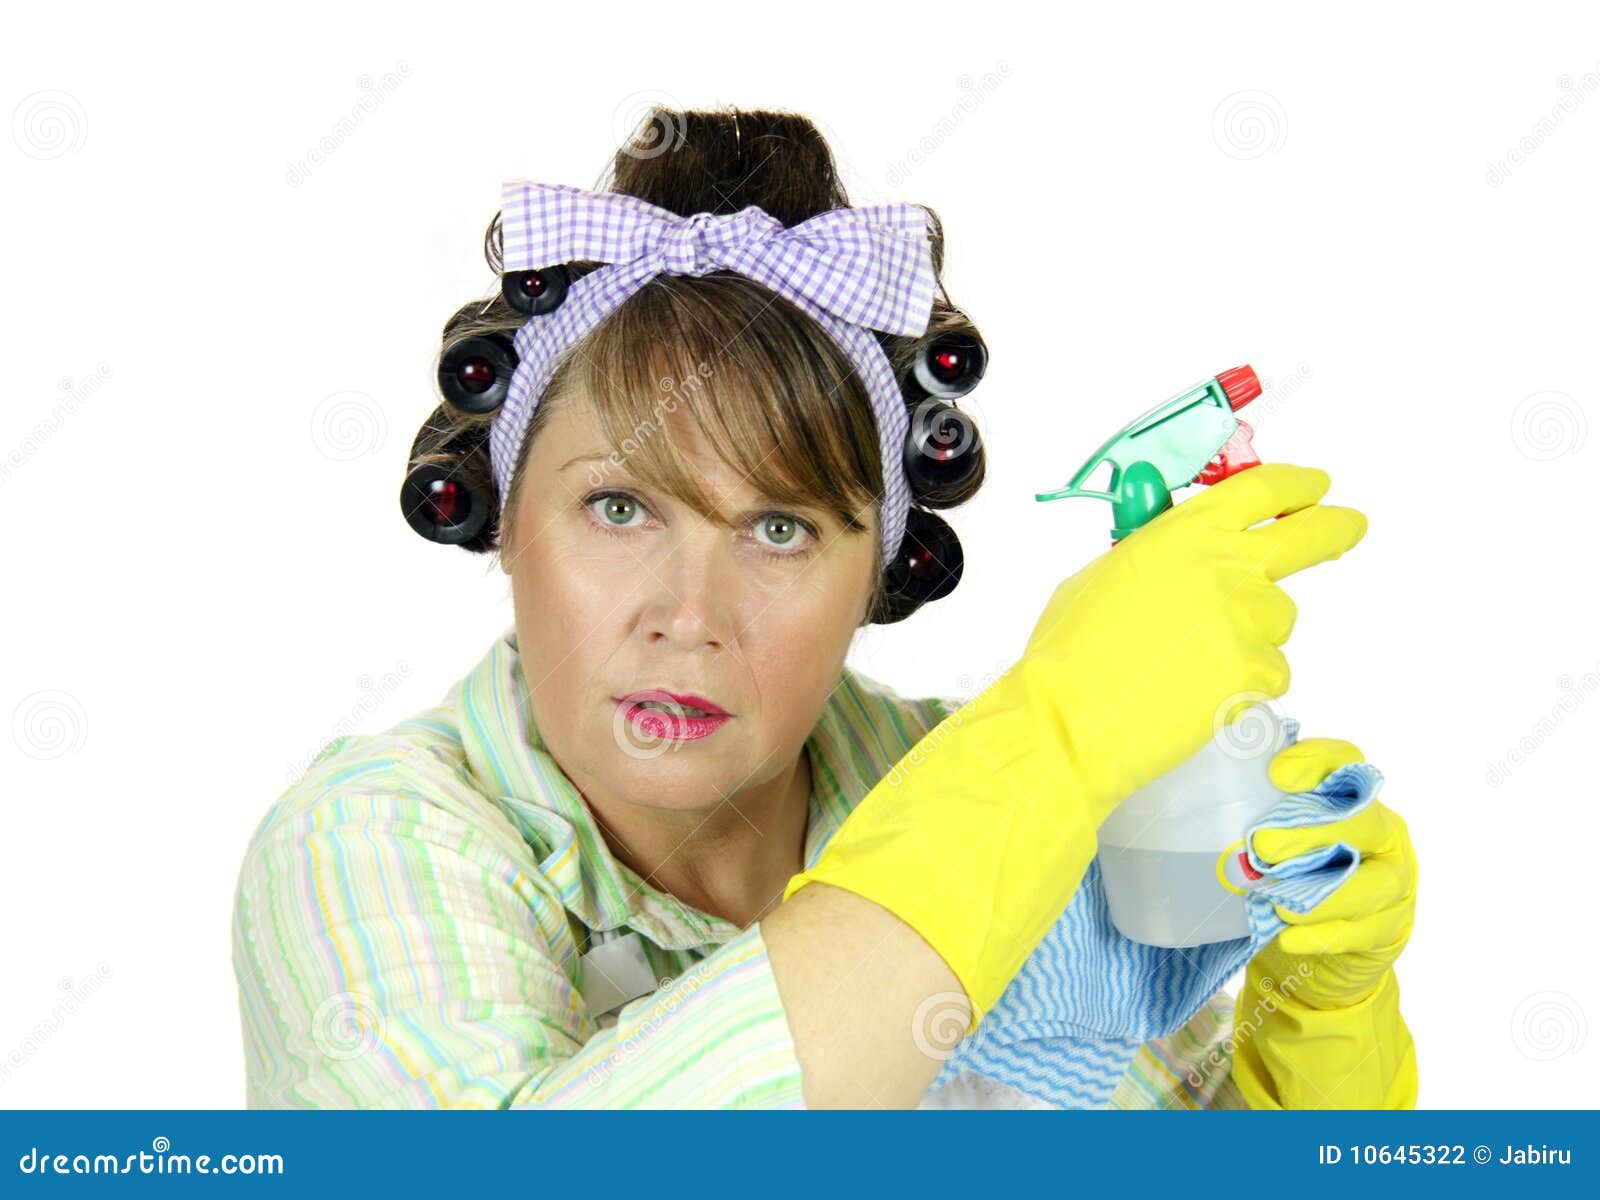 Spray Bottle Housewife stock photo. Image of gloves, scarf - 10645322